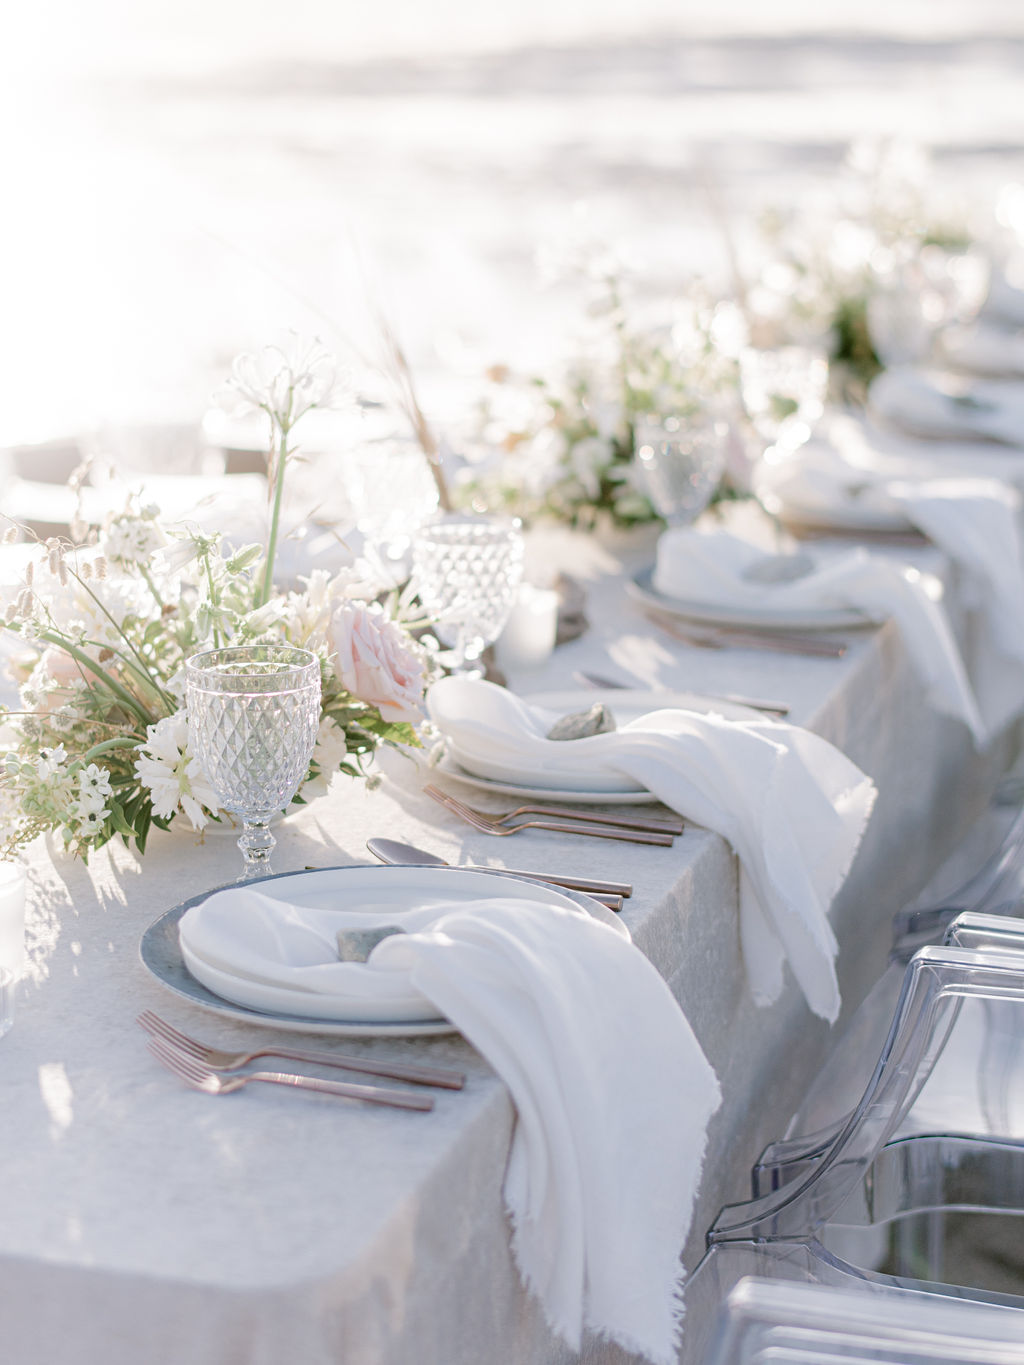 Romantic alfresco dinner along the beach for an intimate Vancouver wedding, spring and summer wedding inspiration in Canada, modern wedding tablescape design with velvet linens, ghost chair seating, and whimsical floral centerpieces in blush and sand tones